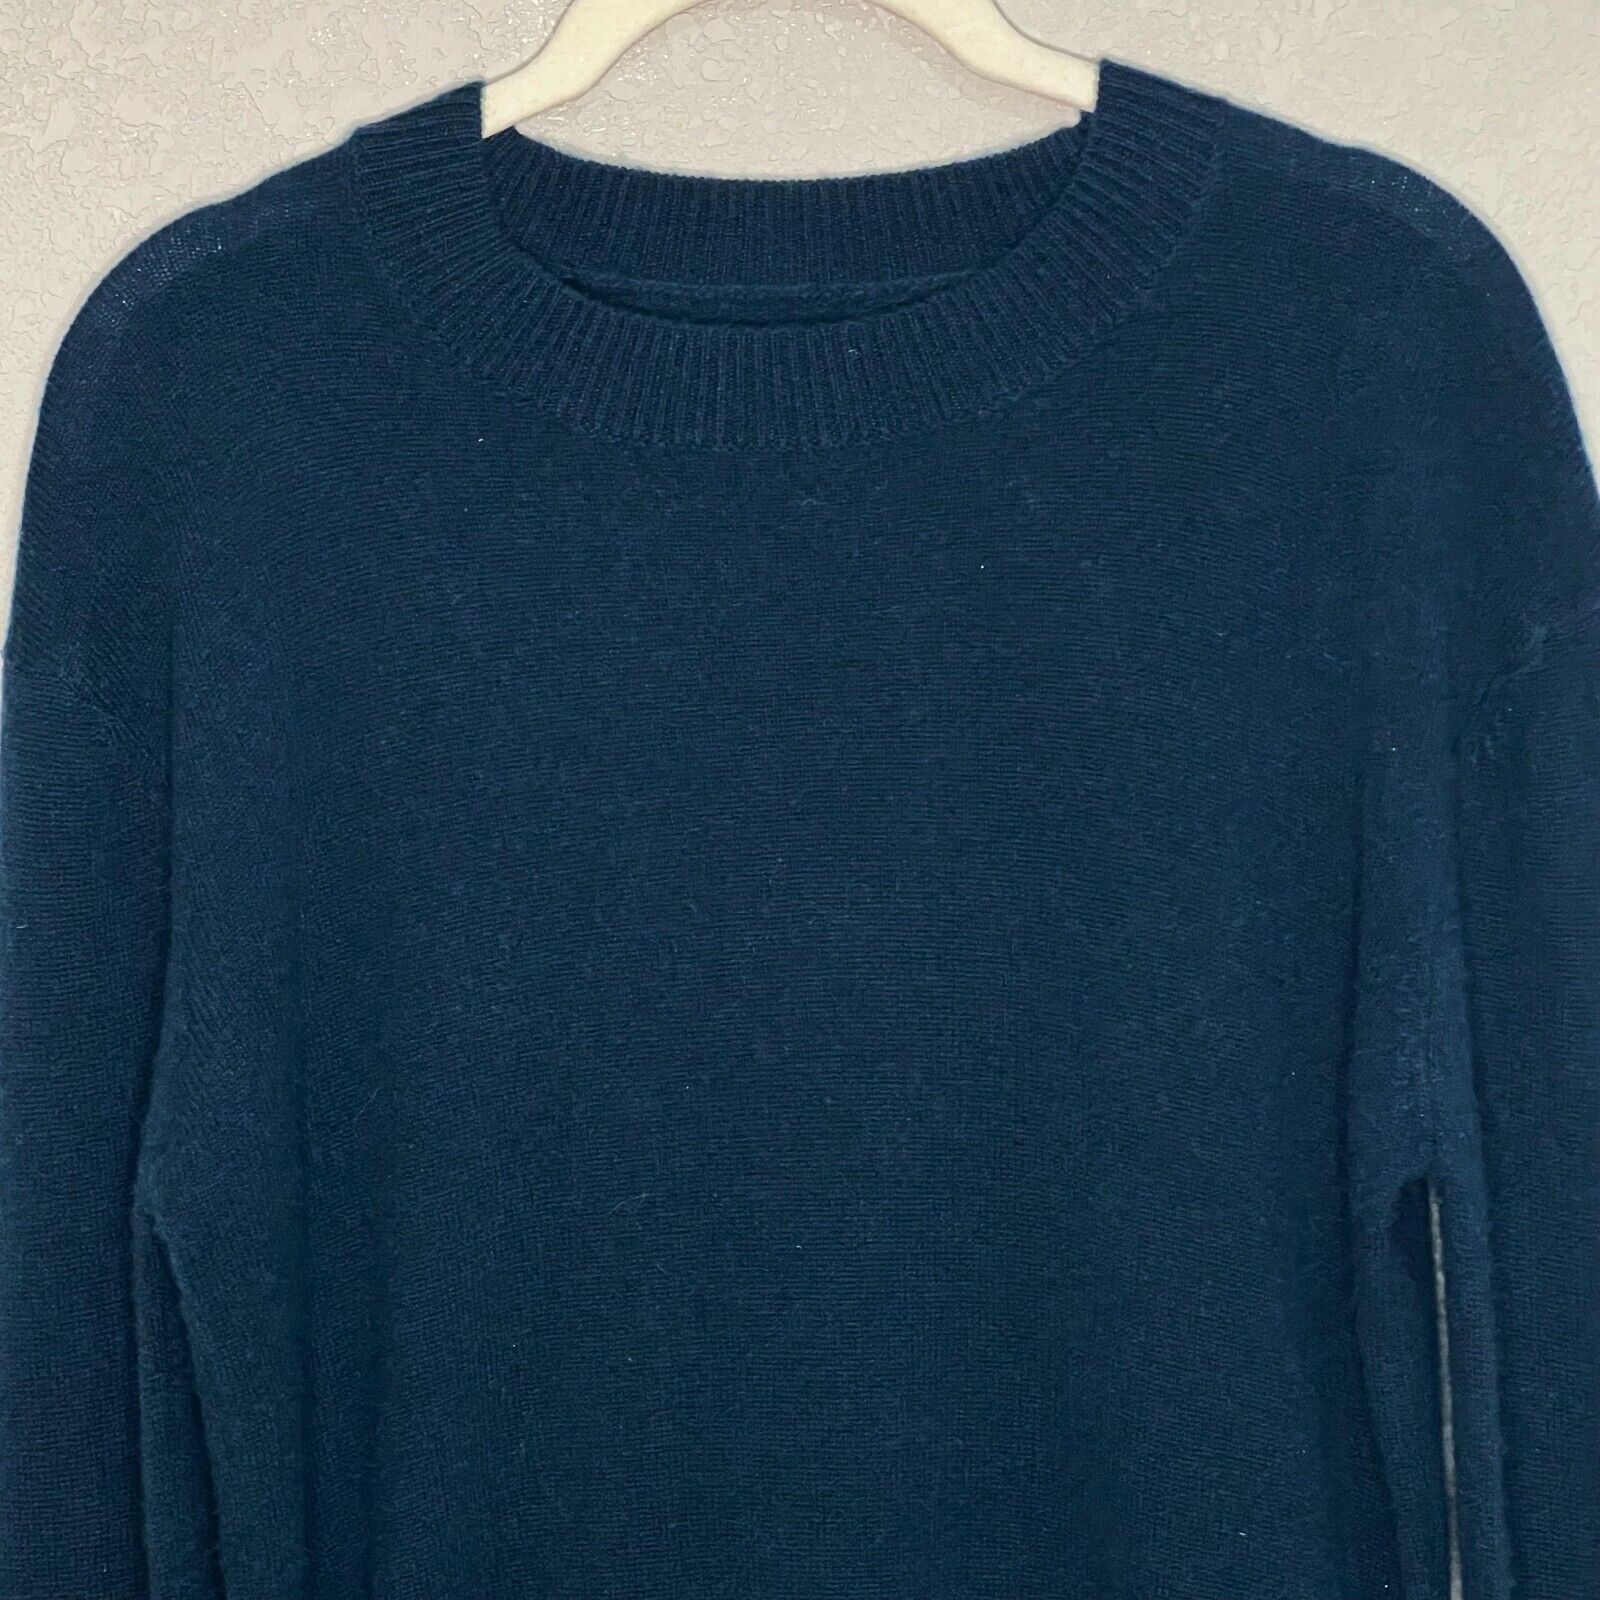 RtA Ocean Green Adrianne 100% Cashmere Size Tie Sweater Size Small $600